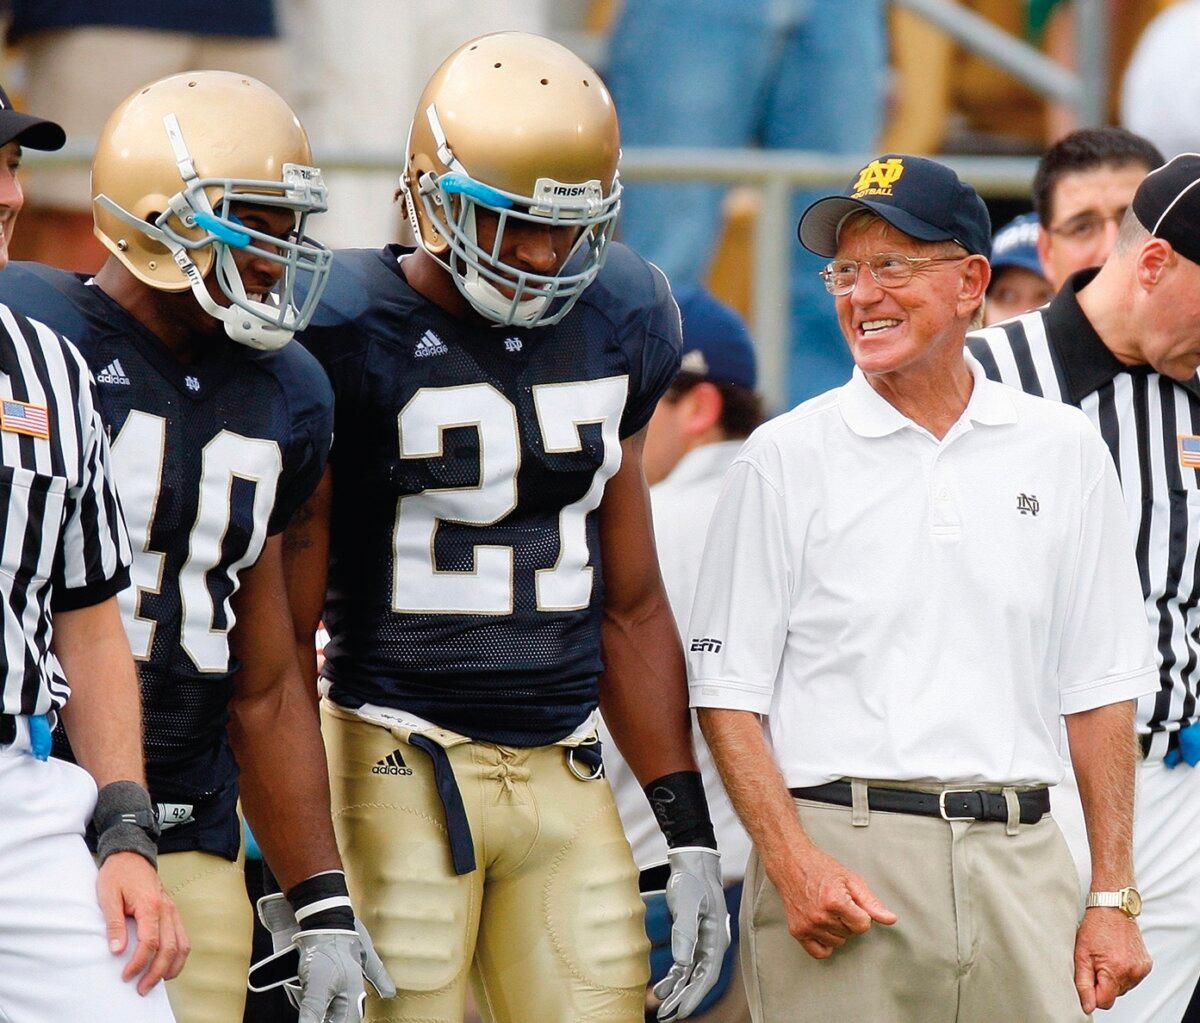 Mr. Holtz stands with Notre Dame players before a game at Notre Dame Stadium in South Bend, Ind., in September 2008. He has led the Fighting Irish to the 1988 National Championship and 100 wins. (Gregory Shamus/Stringer/Getty Images)